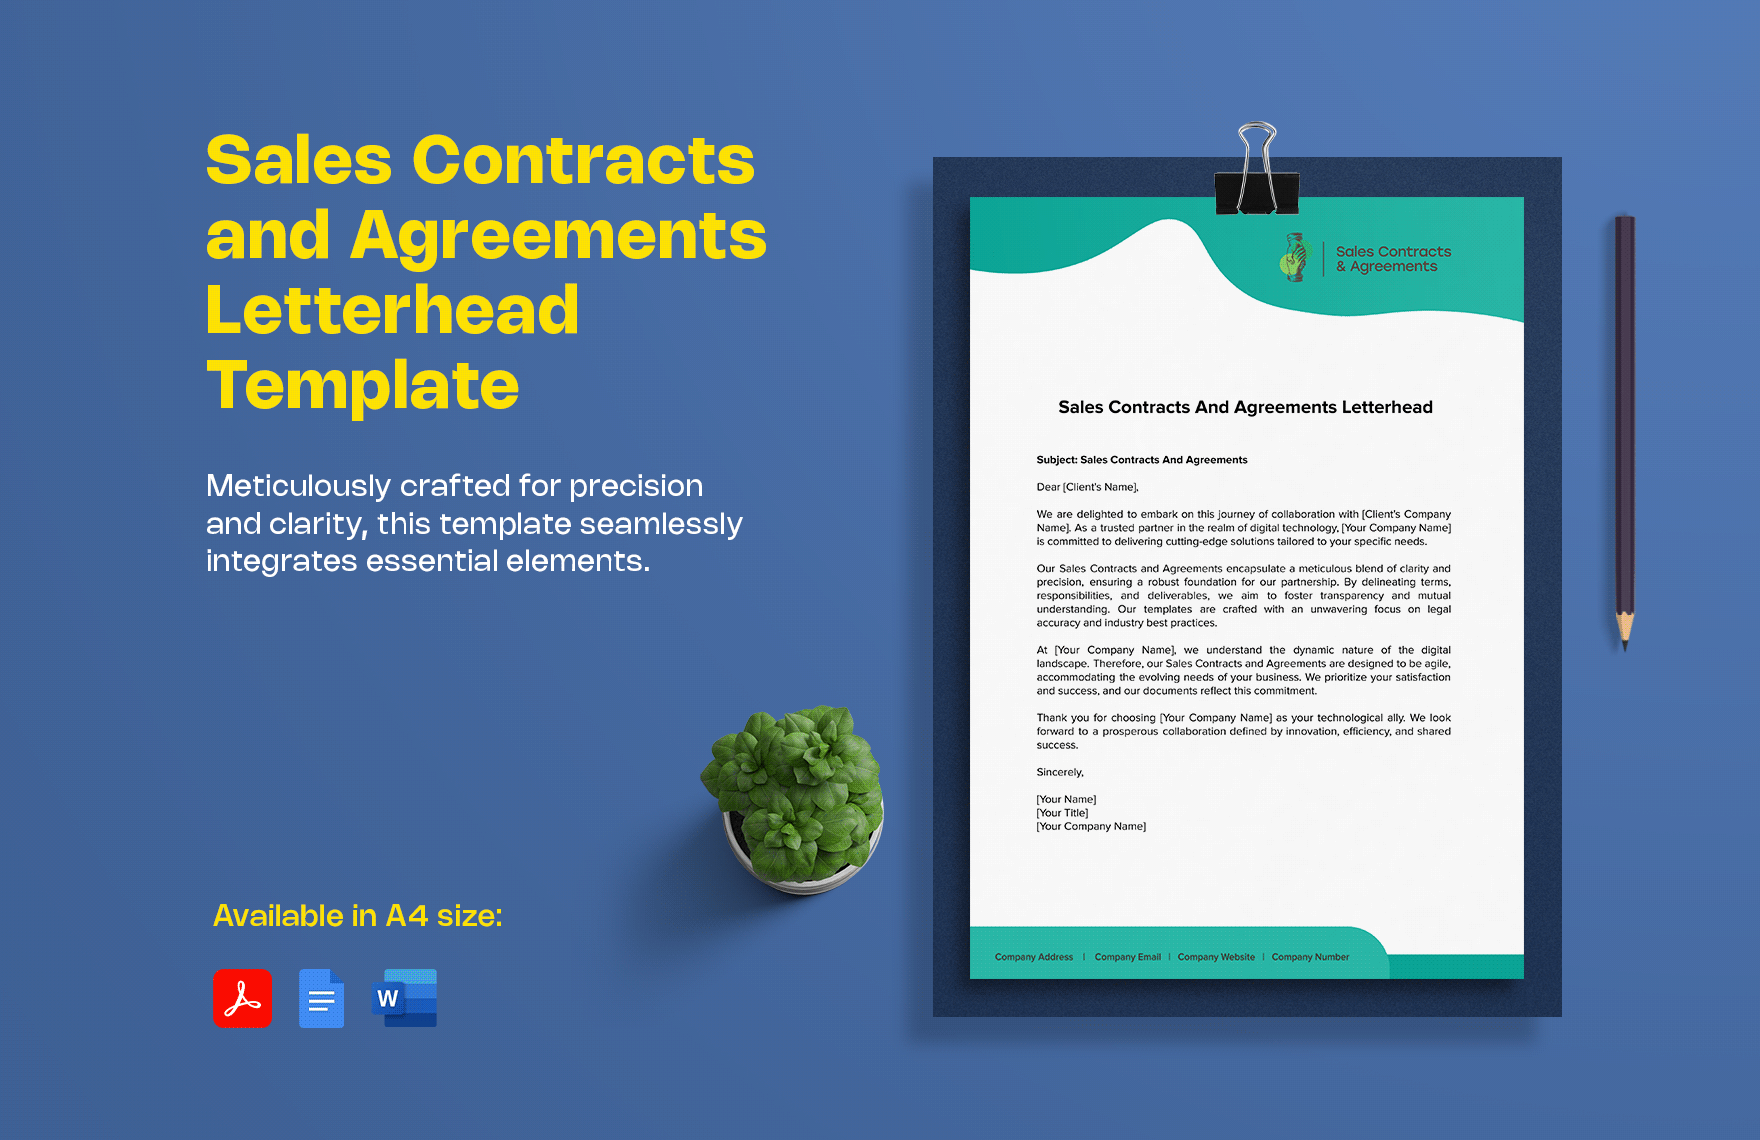 Sales Contracts and Agreements Letterhead Template